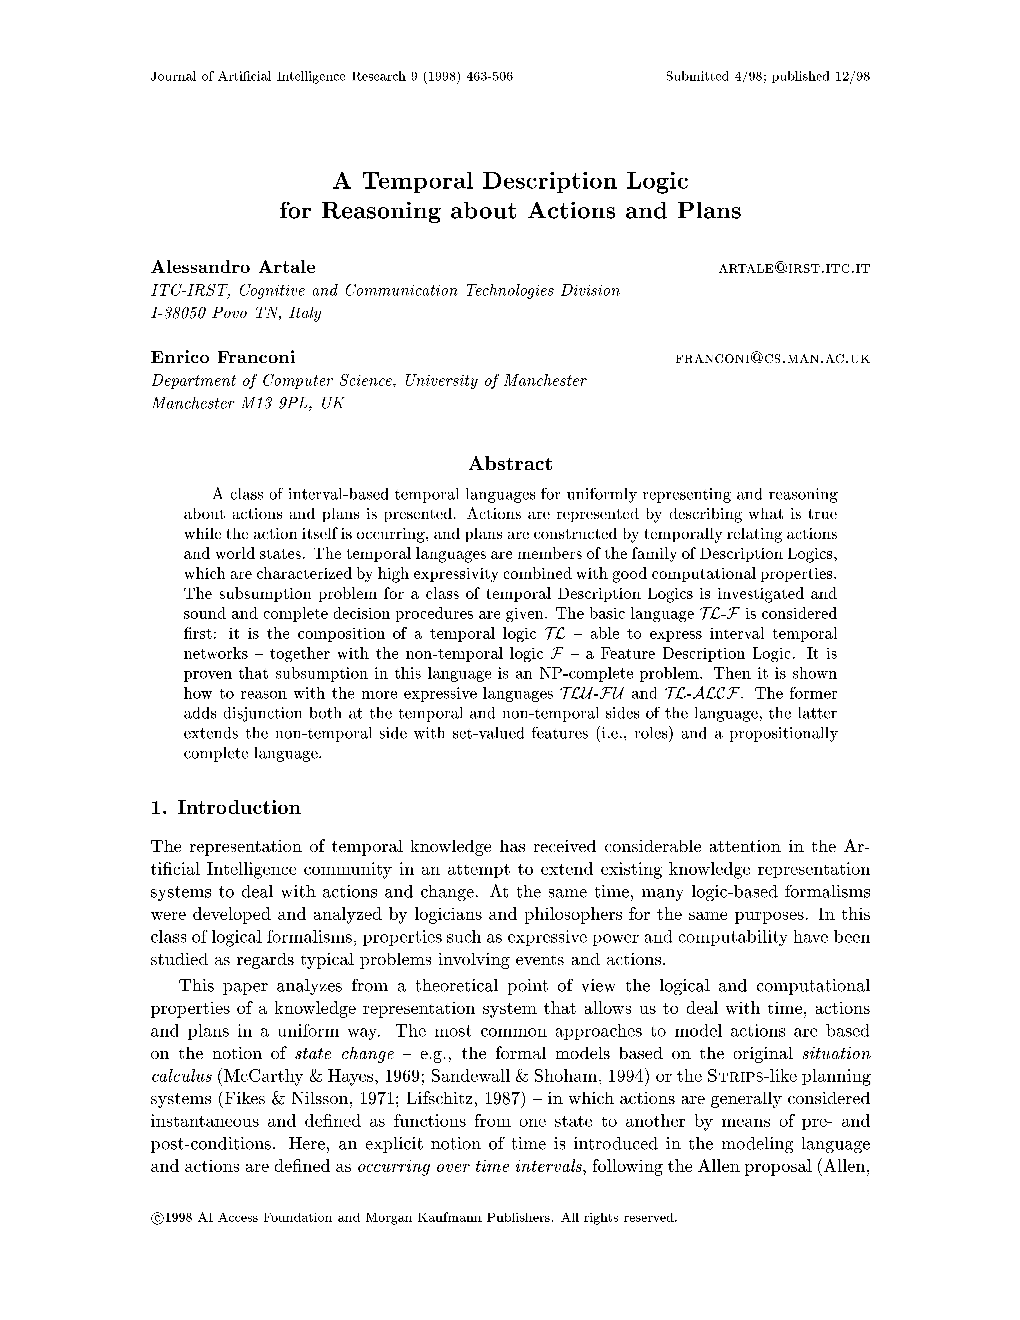 A Temporal Description Logic for Reasoning About Actions and Plans